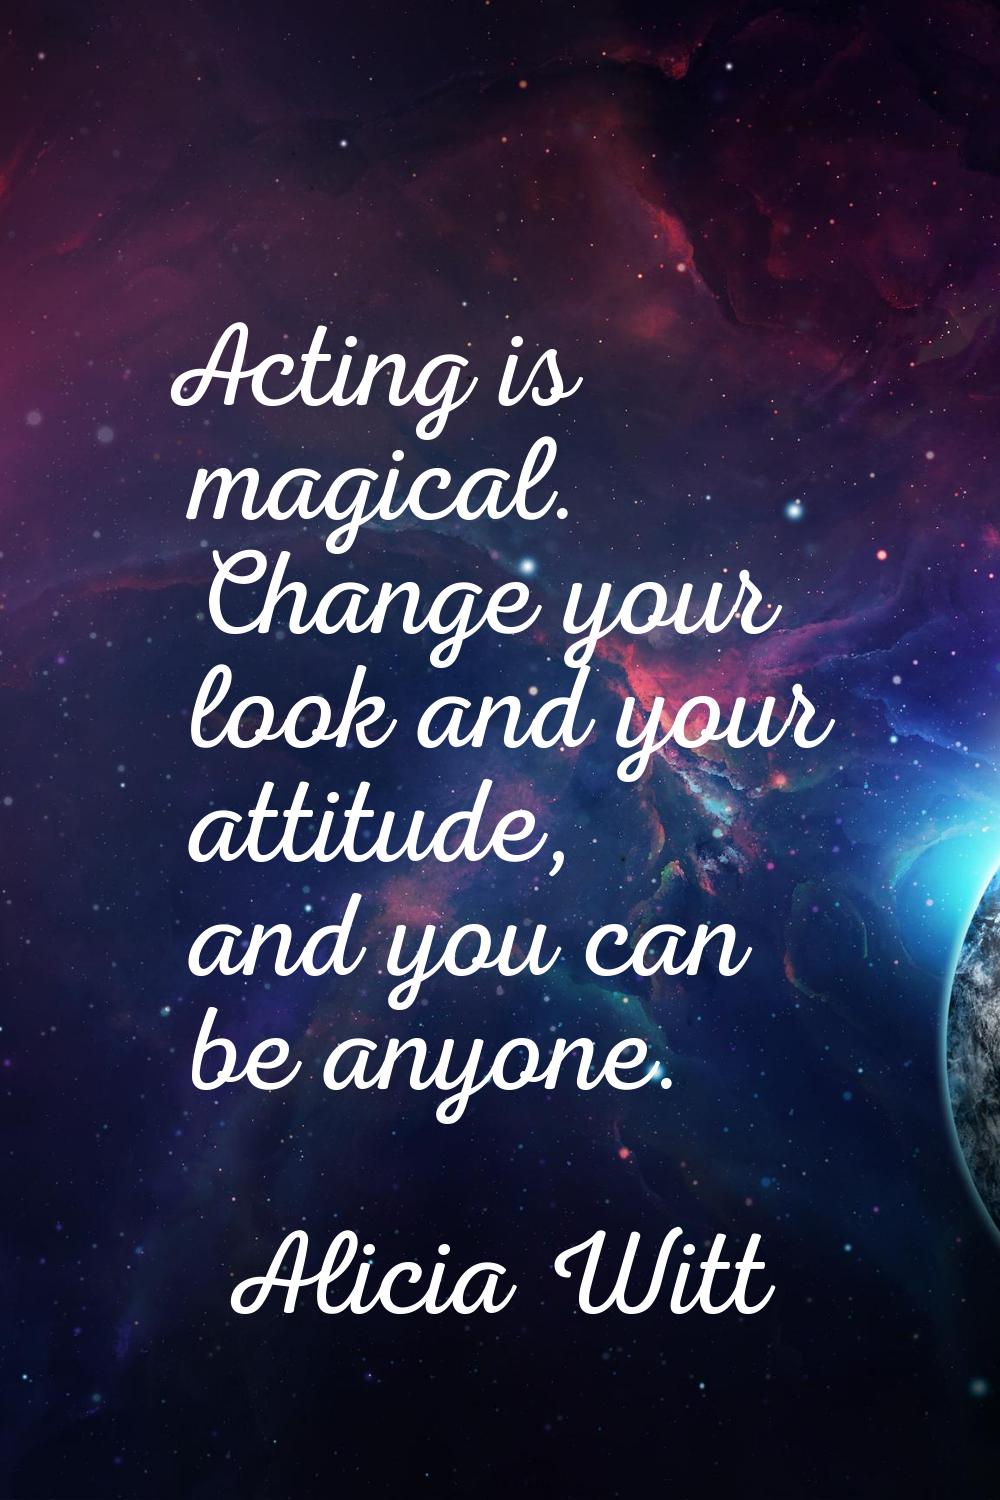 Acting is magical. Change your look and your attitude, and you can be anyone.